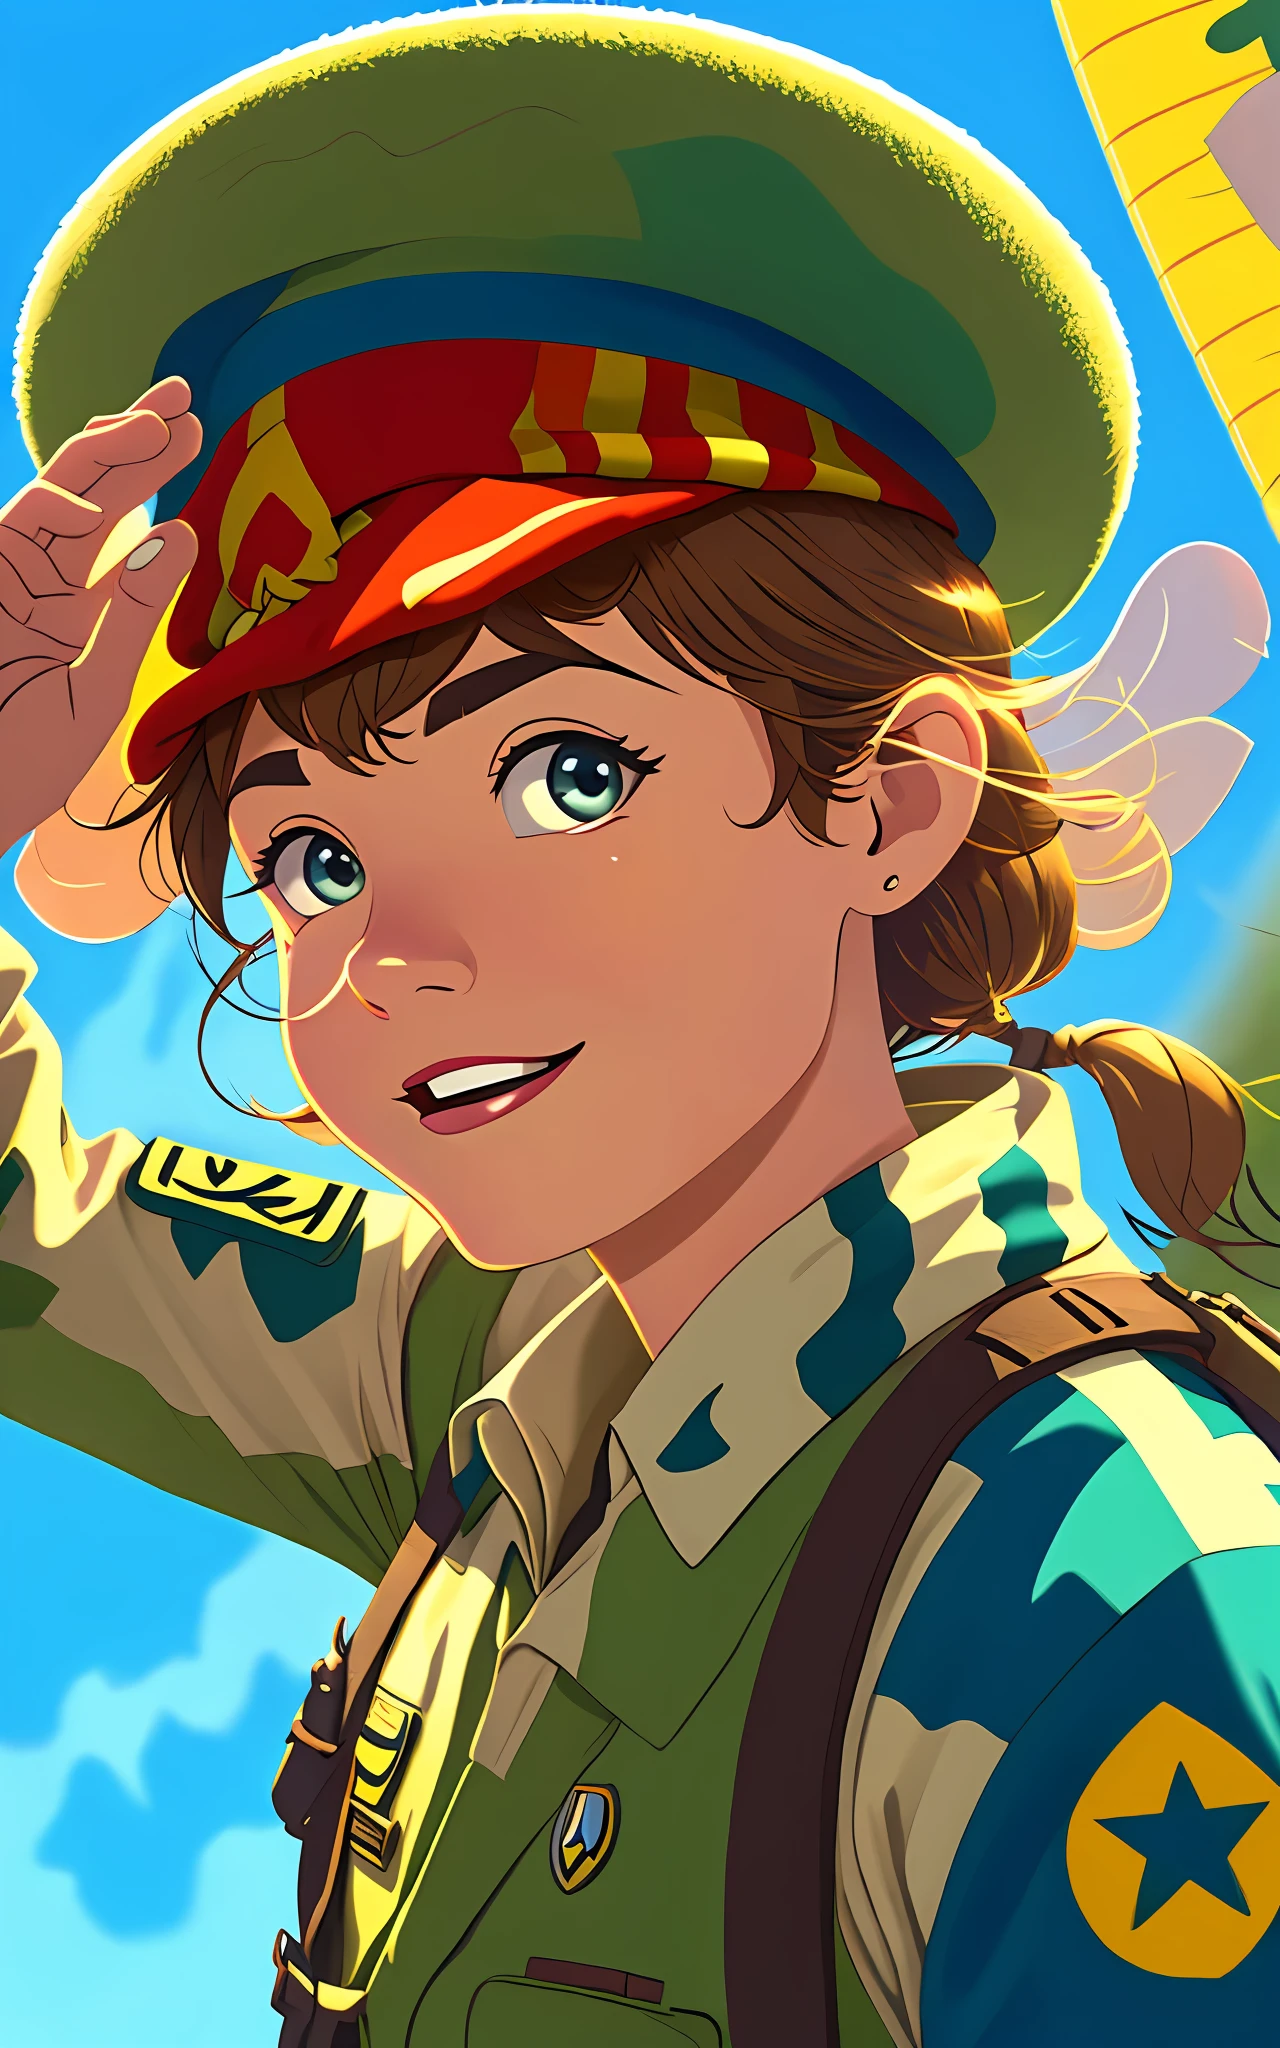 Funny cheerful paratrooper in uniform and blue beret. He waves his hand in greeting. Close-up. Super photorealistic. Disney Pixar cartoon style. Cinematic. Blurred background of parachute exercises and military aircraft. --auto --s2